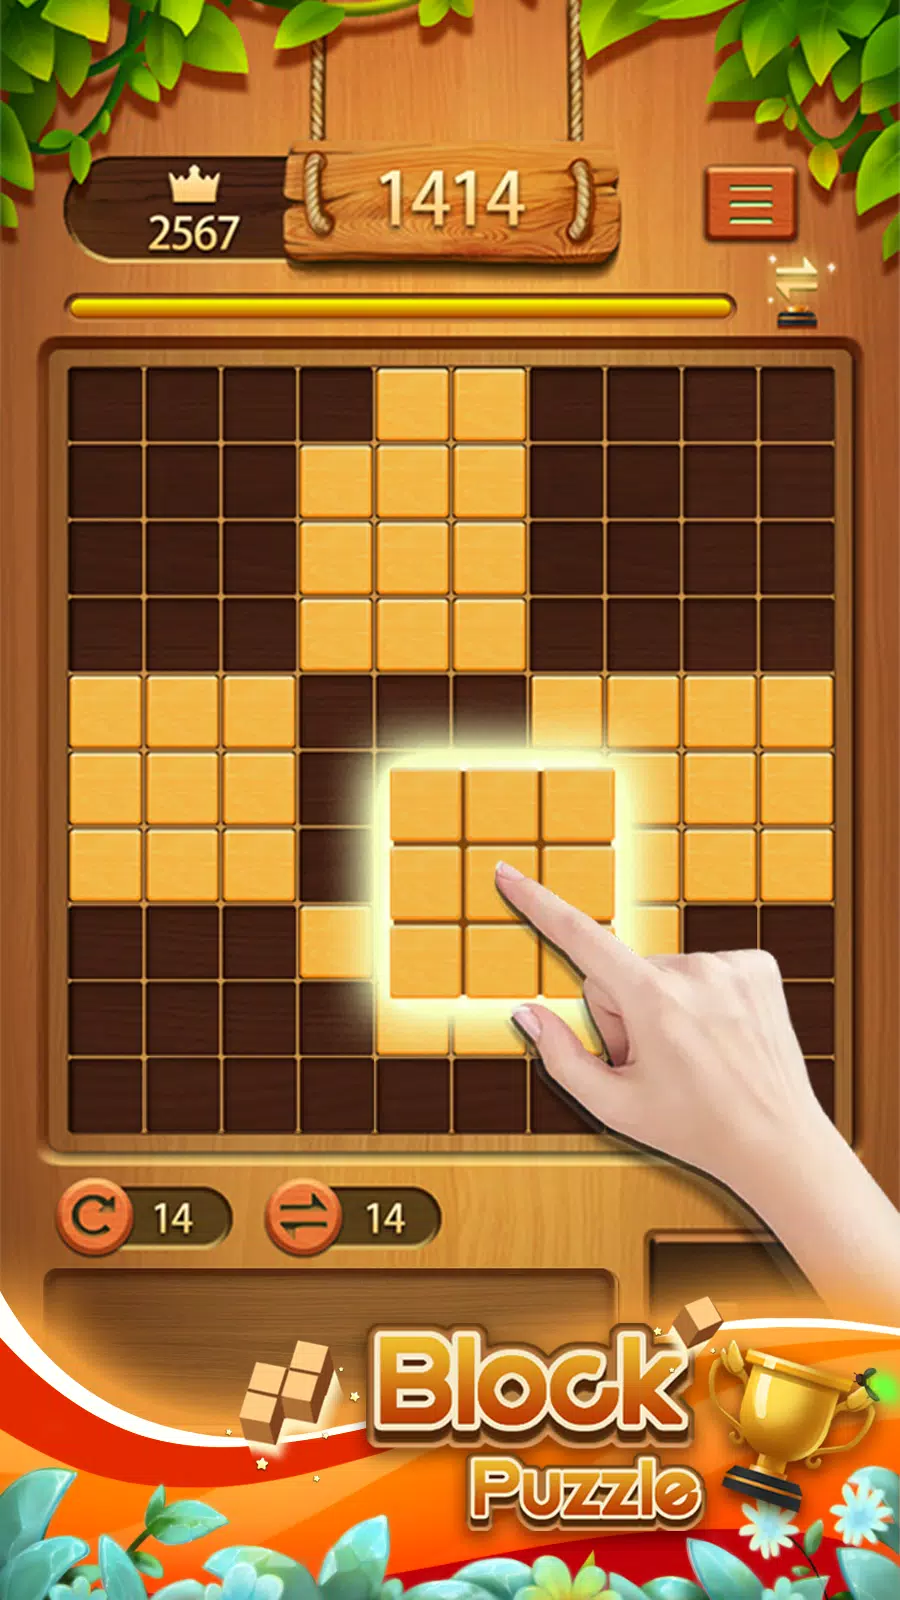 QBlock: Wood Block Puzzle Game Mod apk [Unlimited money] download - QBlock:  Wood Block Puzzle Game MOD apk 2.7.8 free for Android.